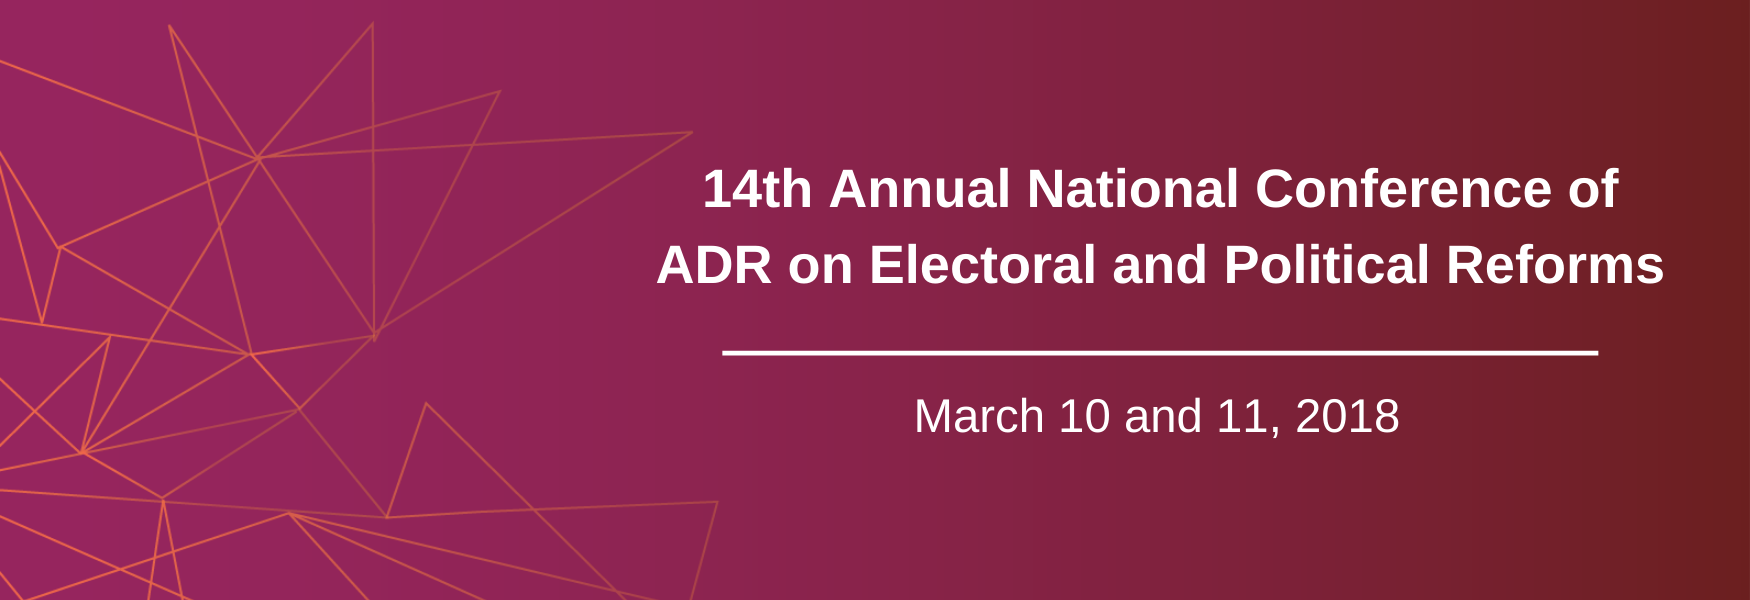 14th Annual National Conference of ADR on Electoral and Political Reforms